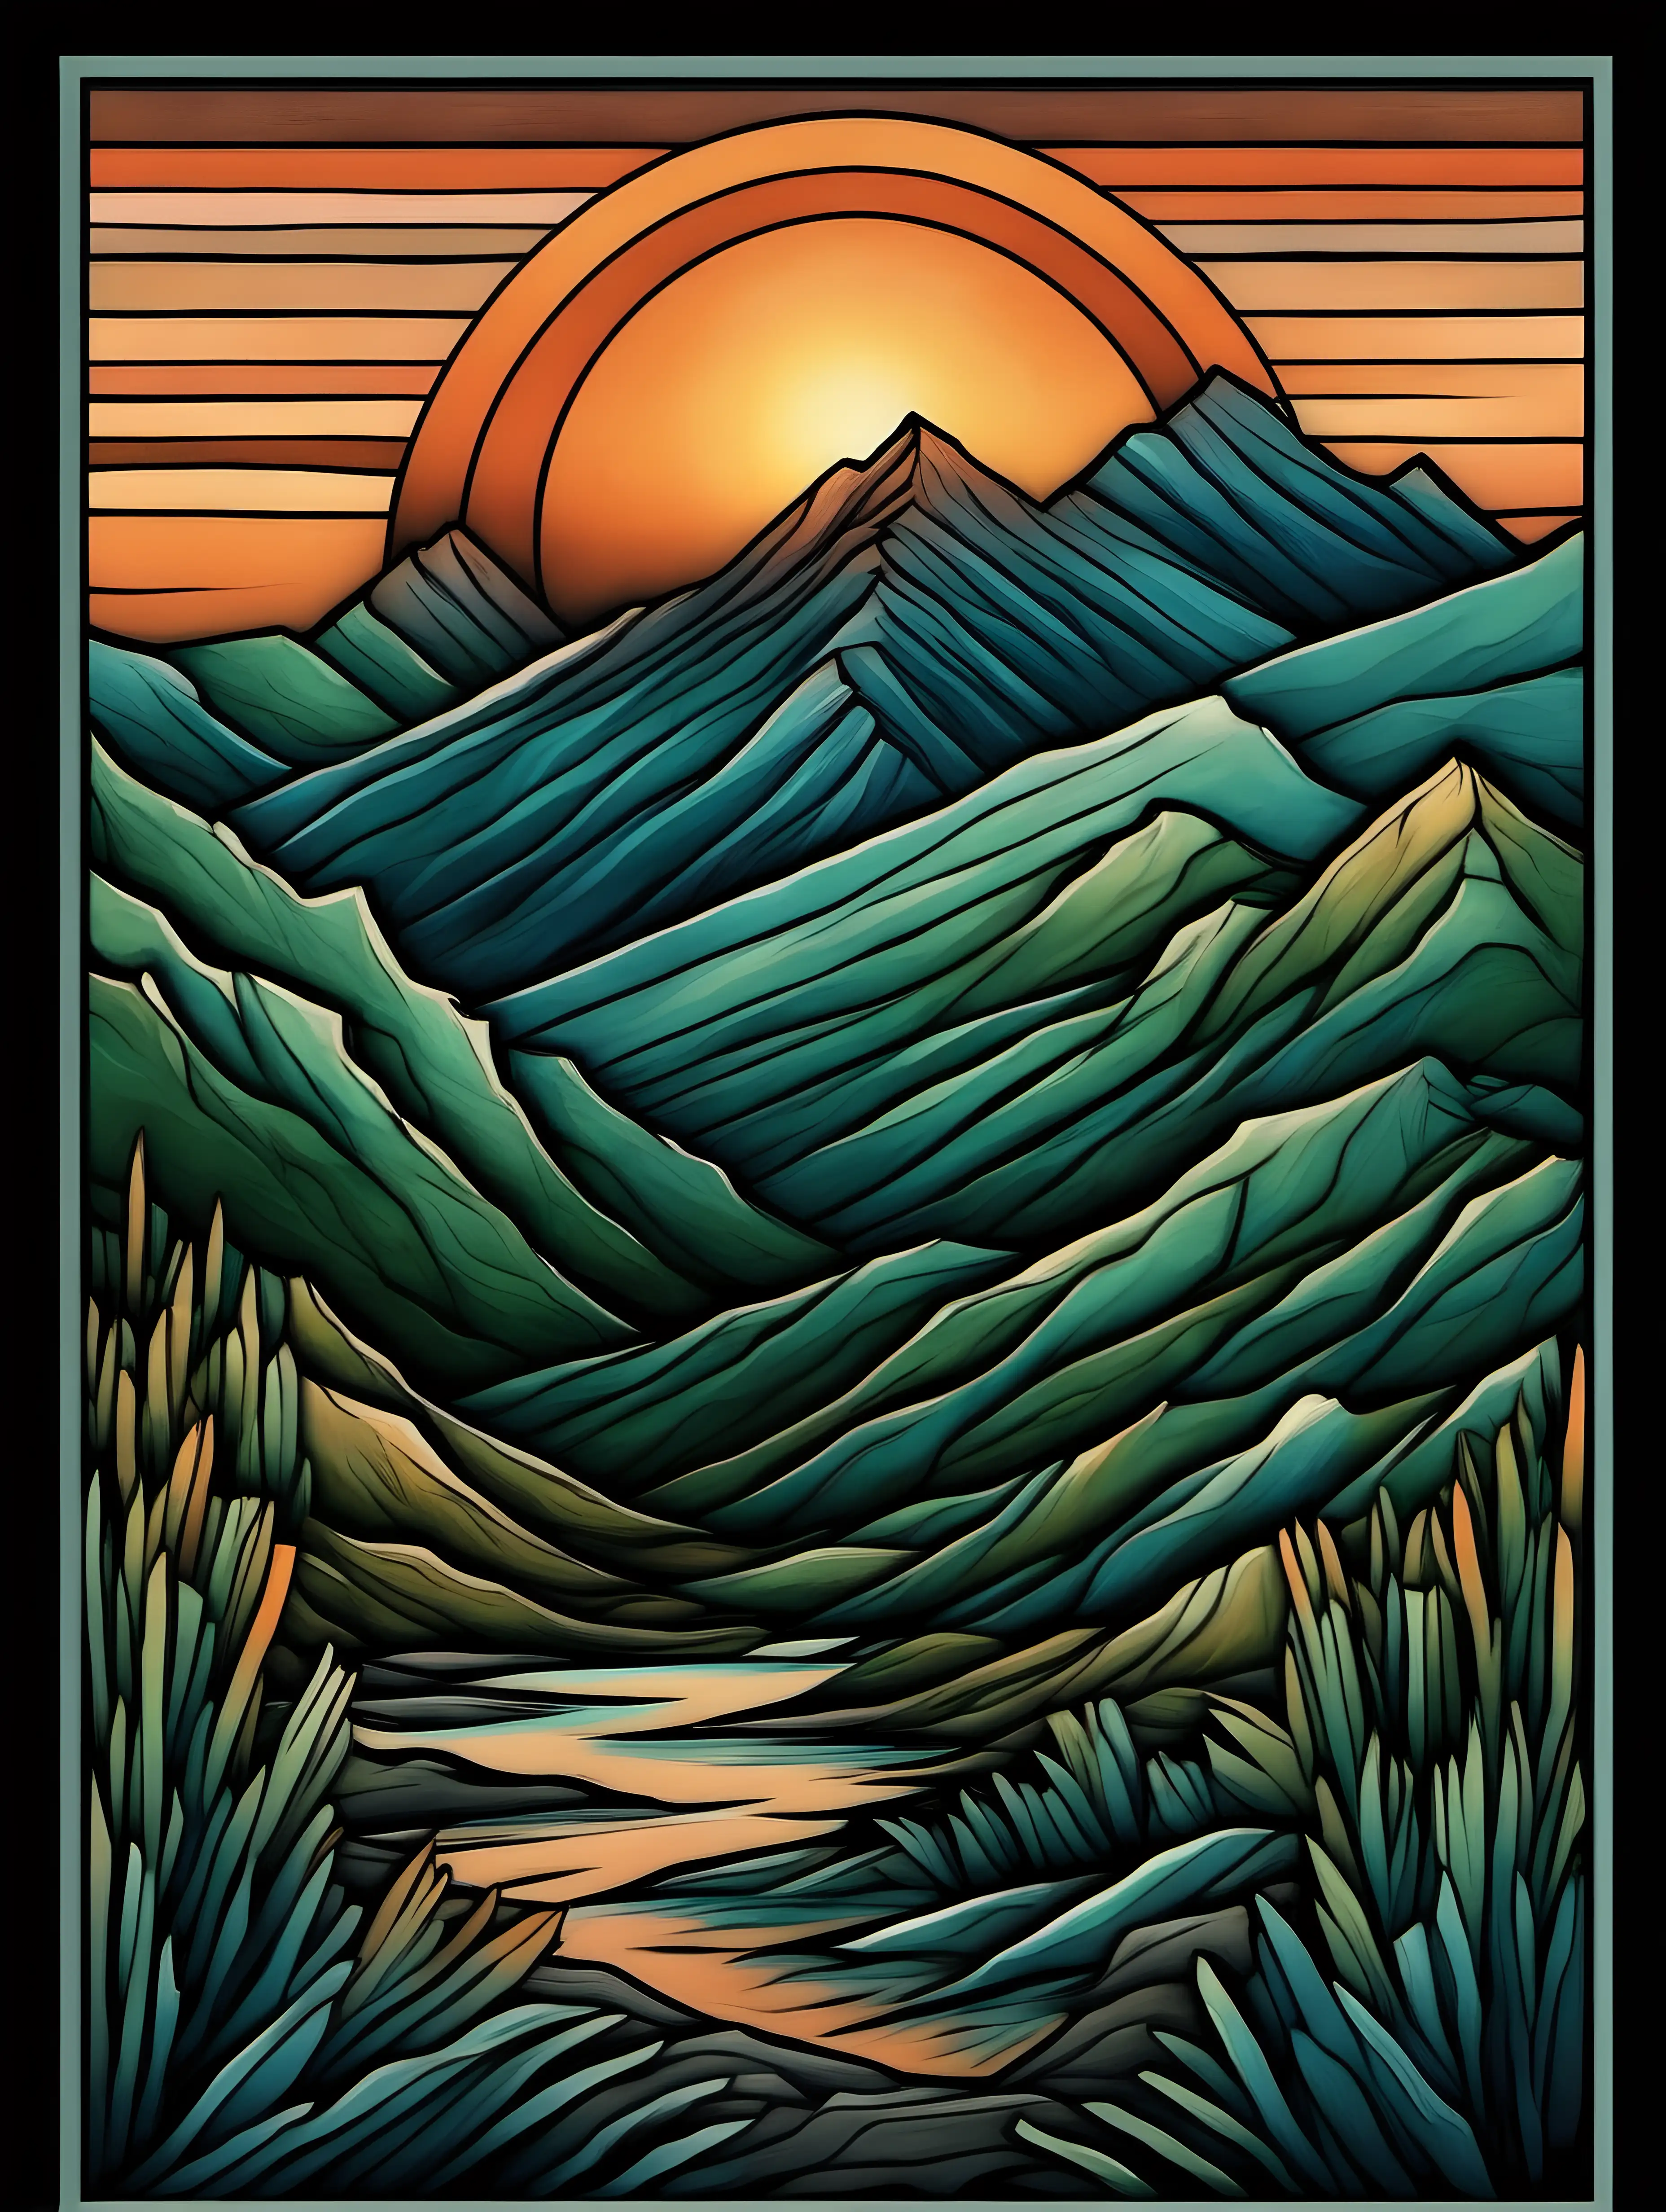 Scenic Mountain Landscape in Tranquil Greens Teals and Blues with Muted Orange Sunset